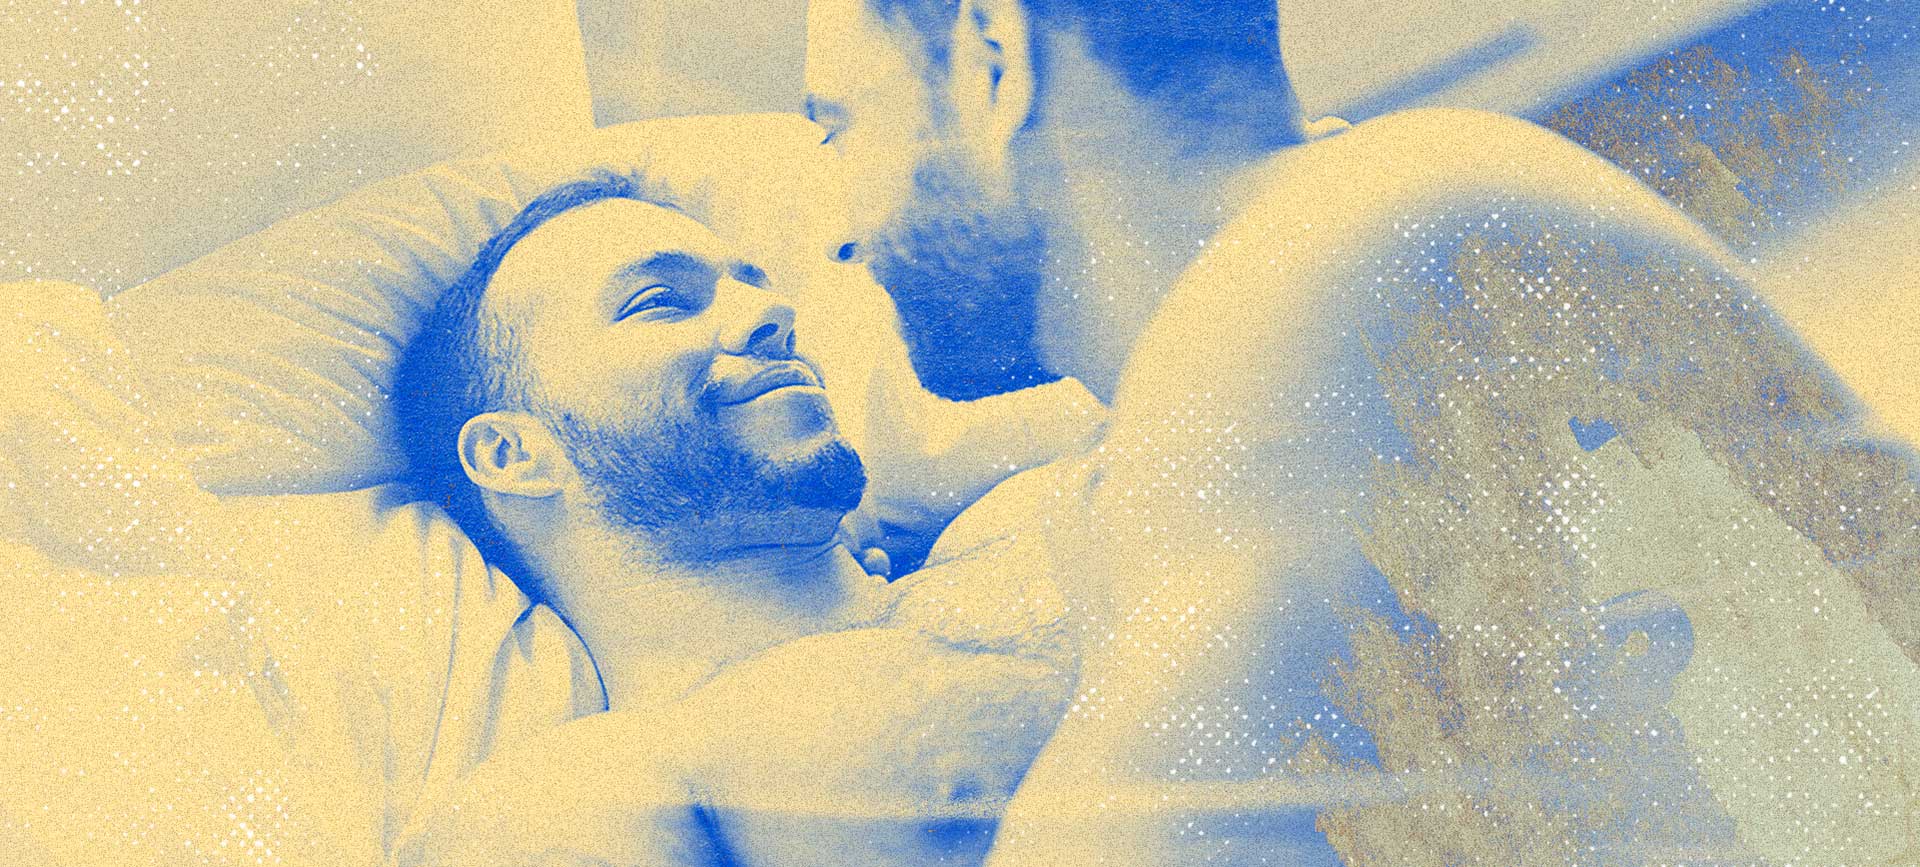 Two men lay in bed smiling at each other.